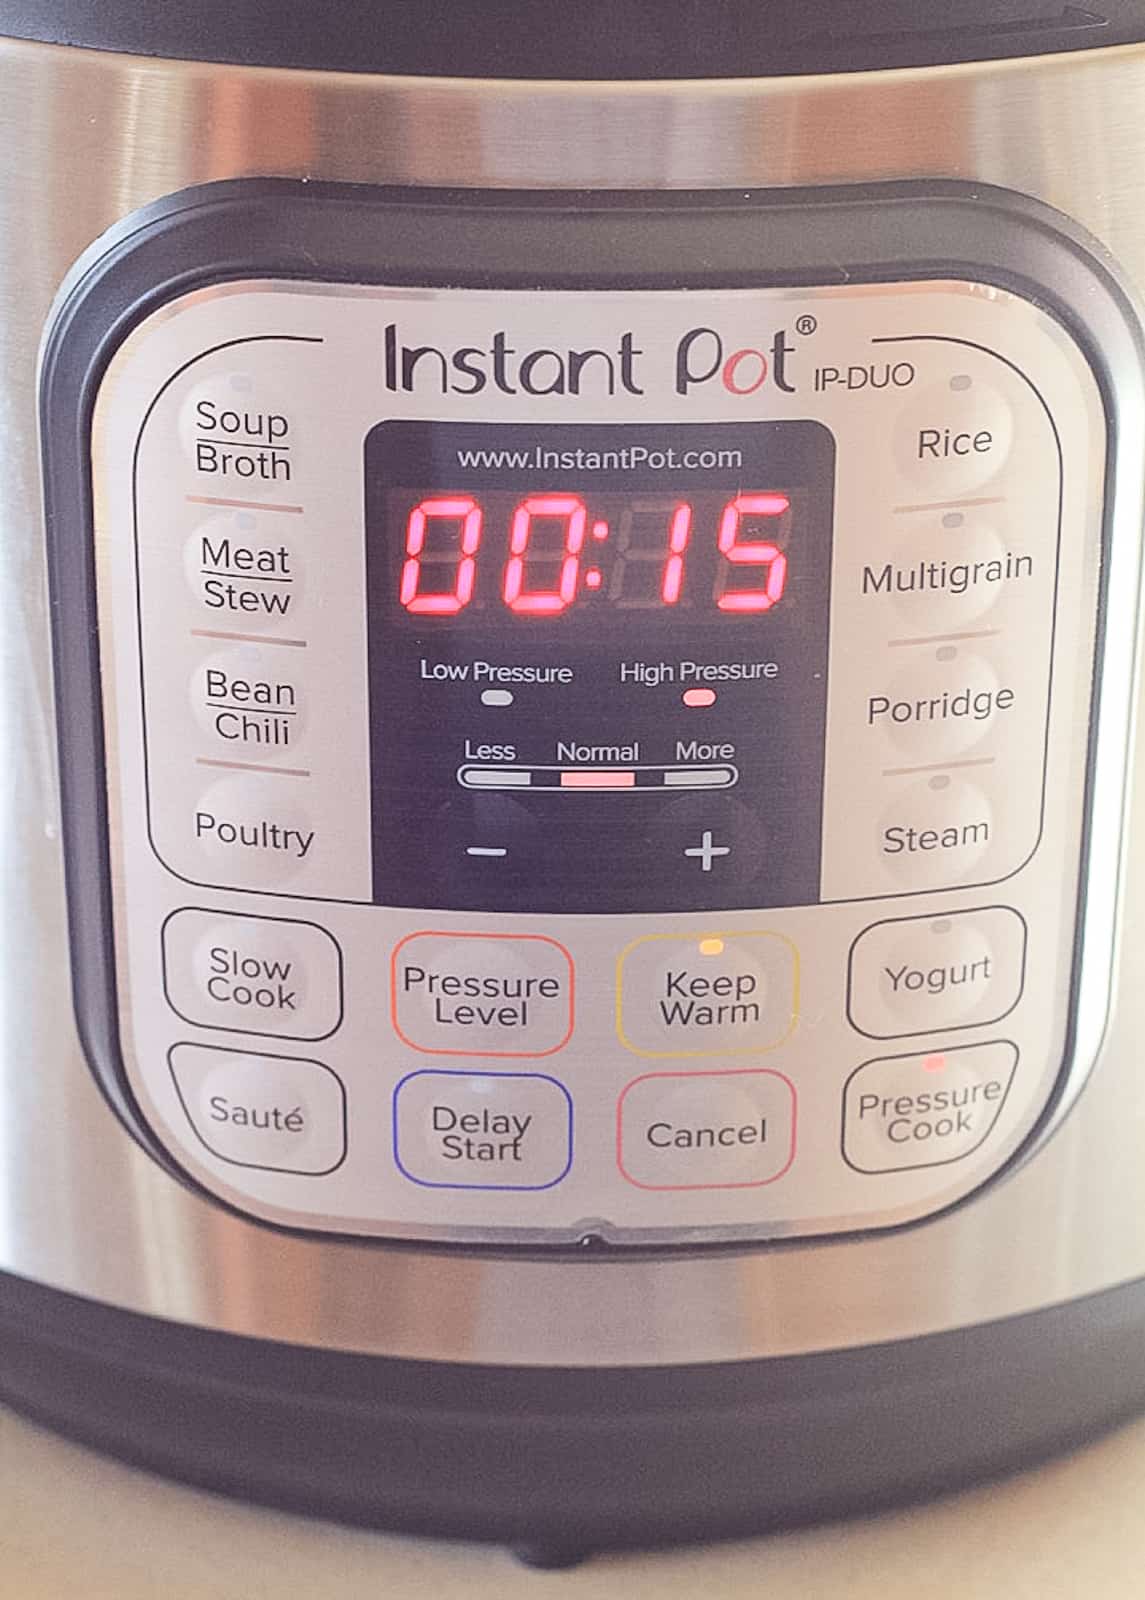 Front of the Instant Pot with 15 minutes of cook time listed on high pressure.